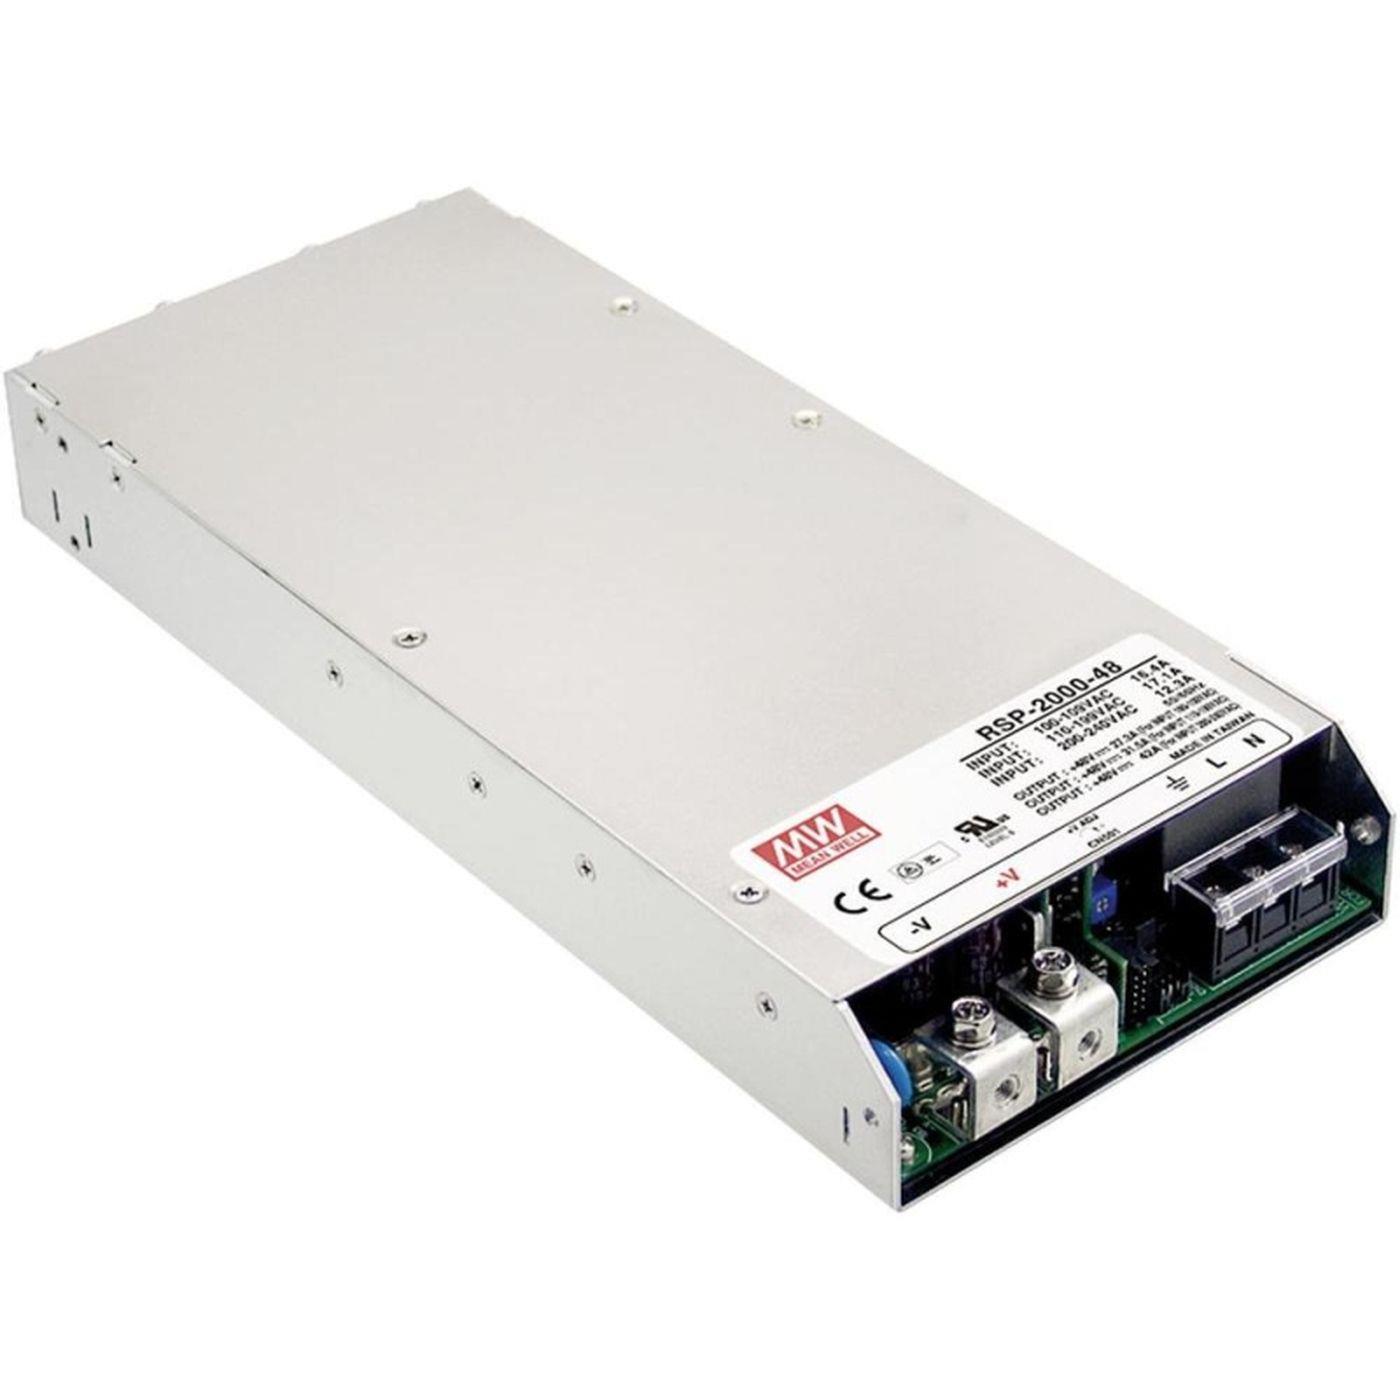 RSP-2000-12 1200W 12V 100A Industrial power supply